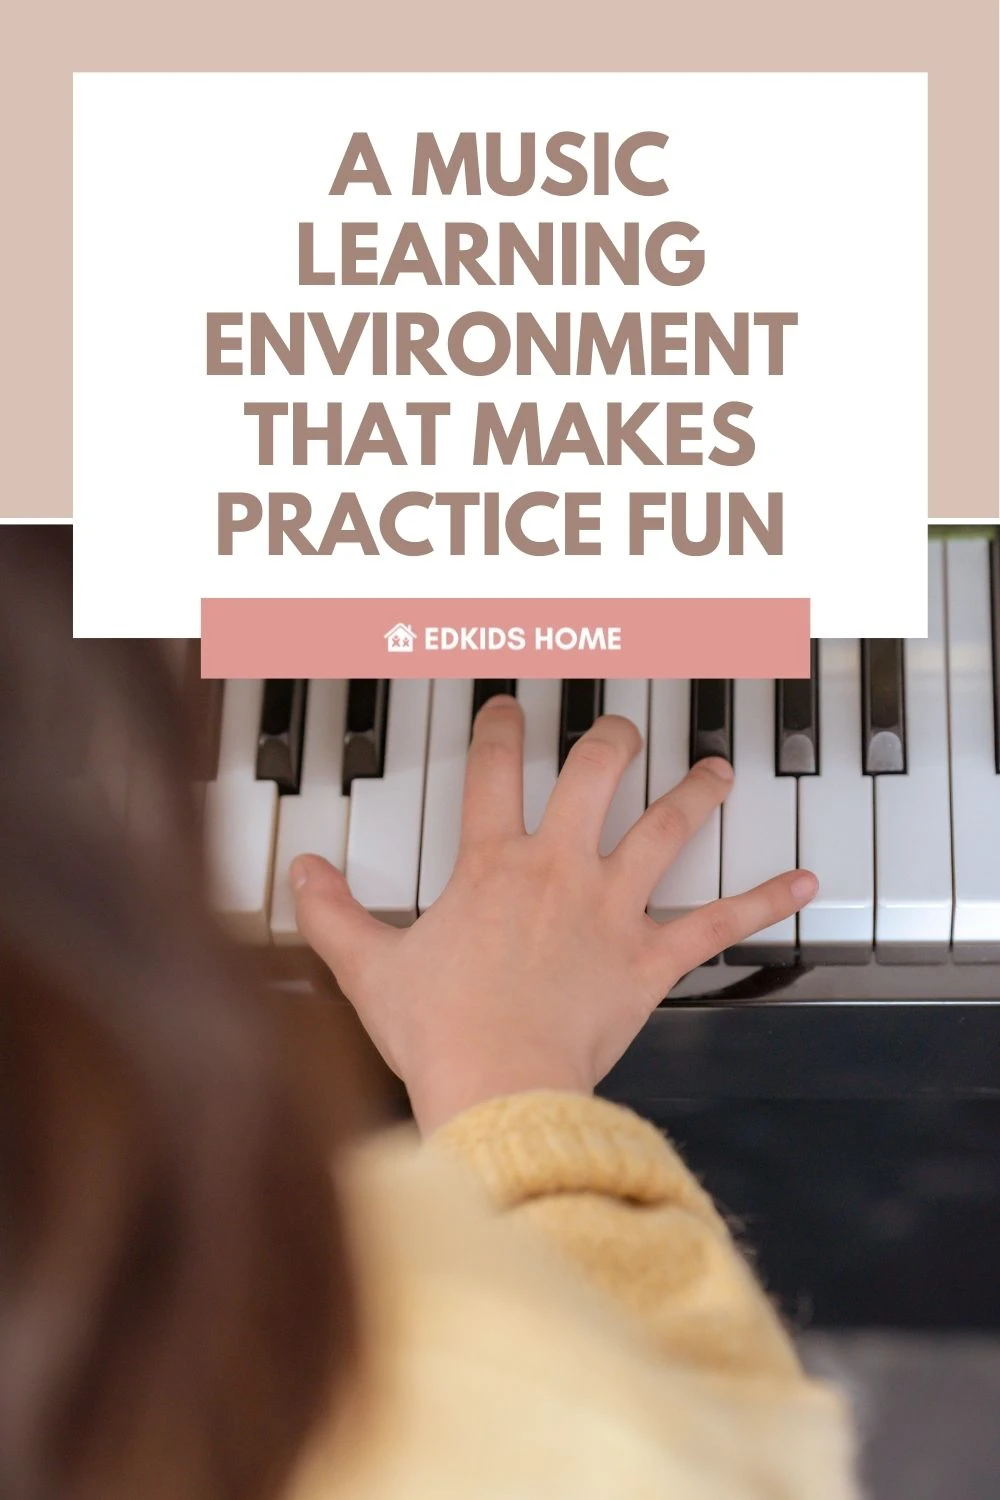 A music learning environment that makes practice fun | 13 Tips for Motivate Child to Practice Musical Instruments